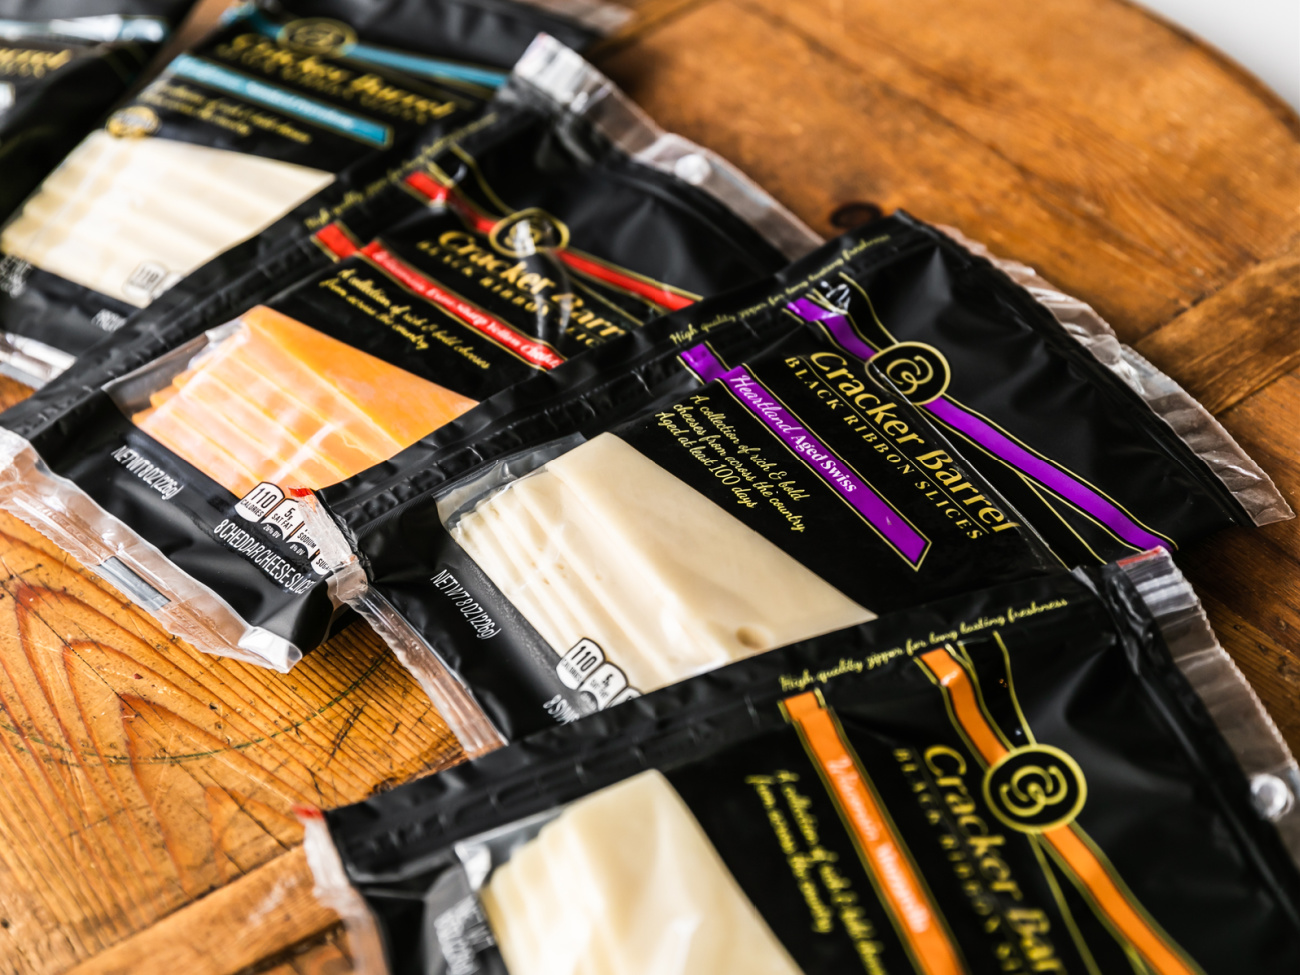 Great Deal On All The Delicious Varieties Of Cracker Barrel Black Ribbon Cheese Slices At Publix on I Heart Publix